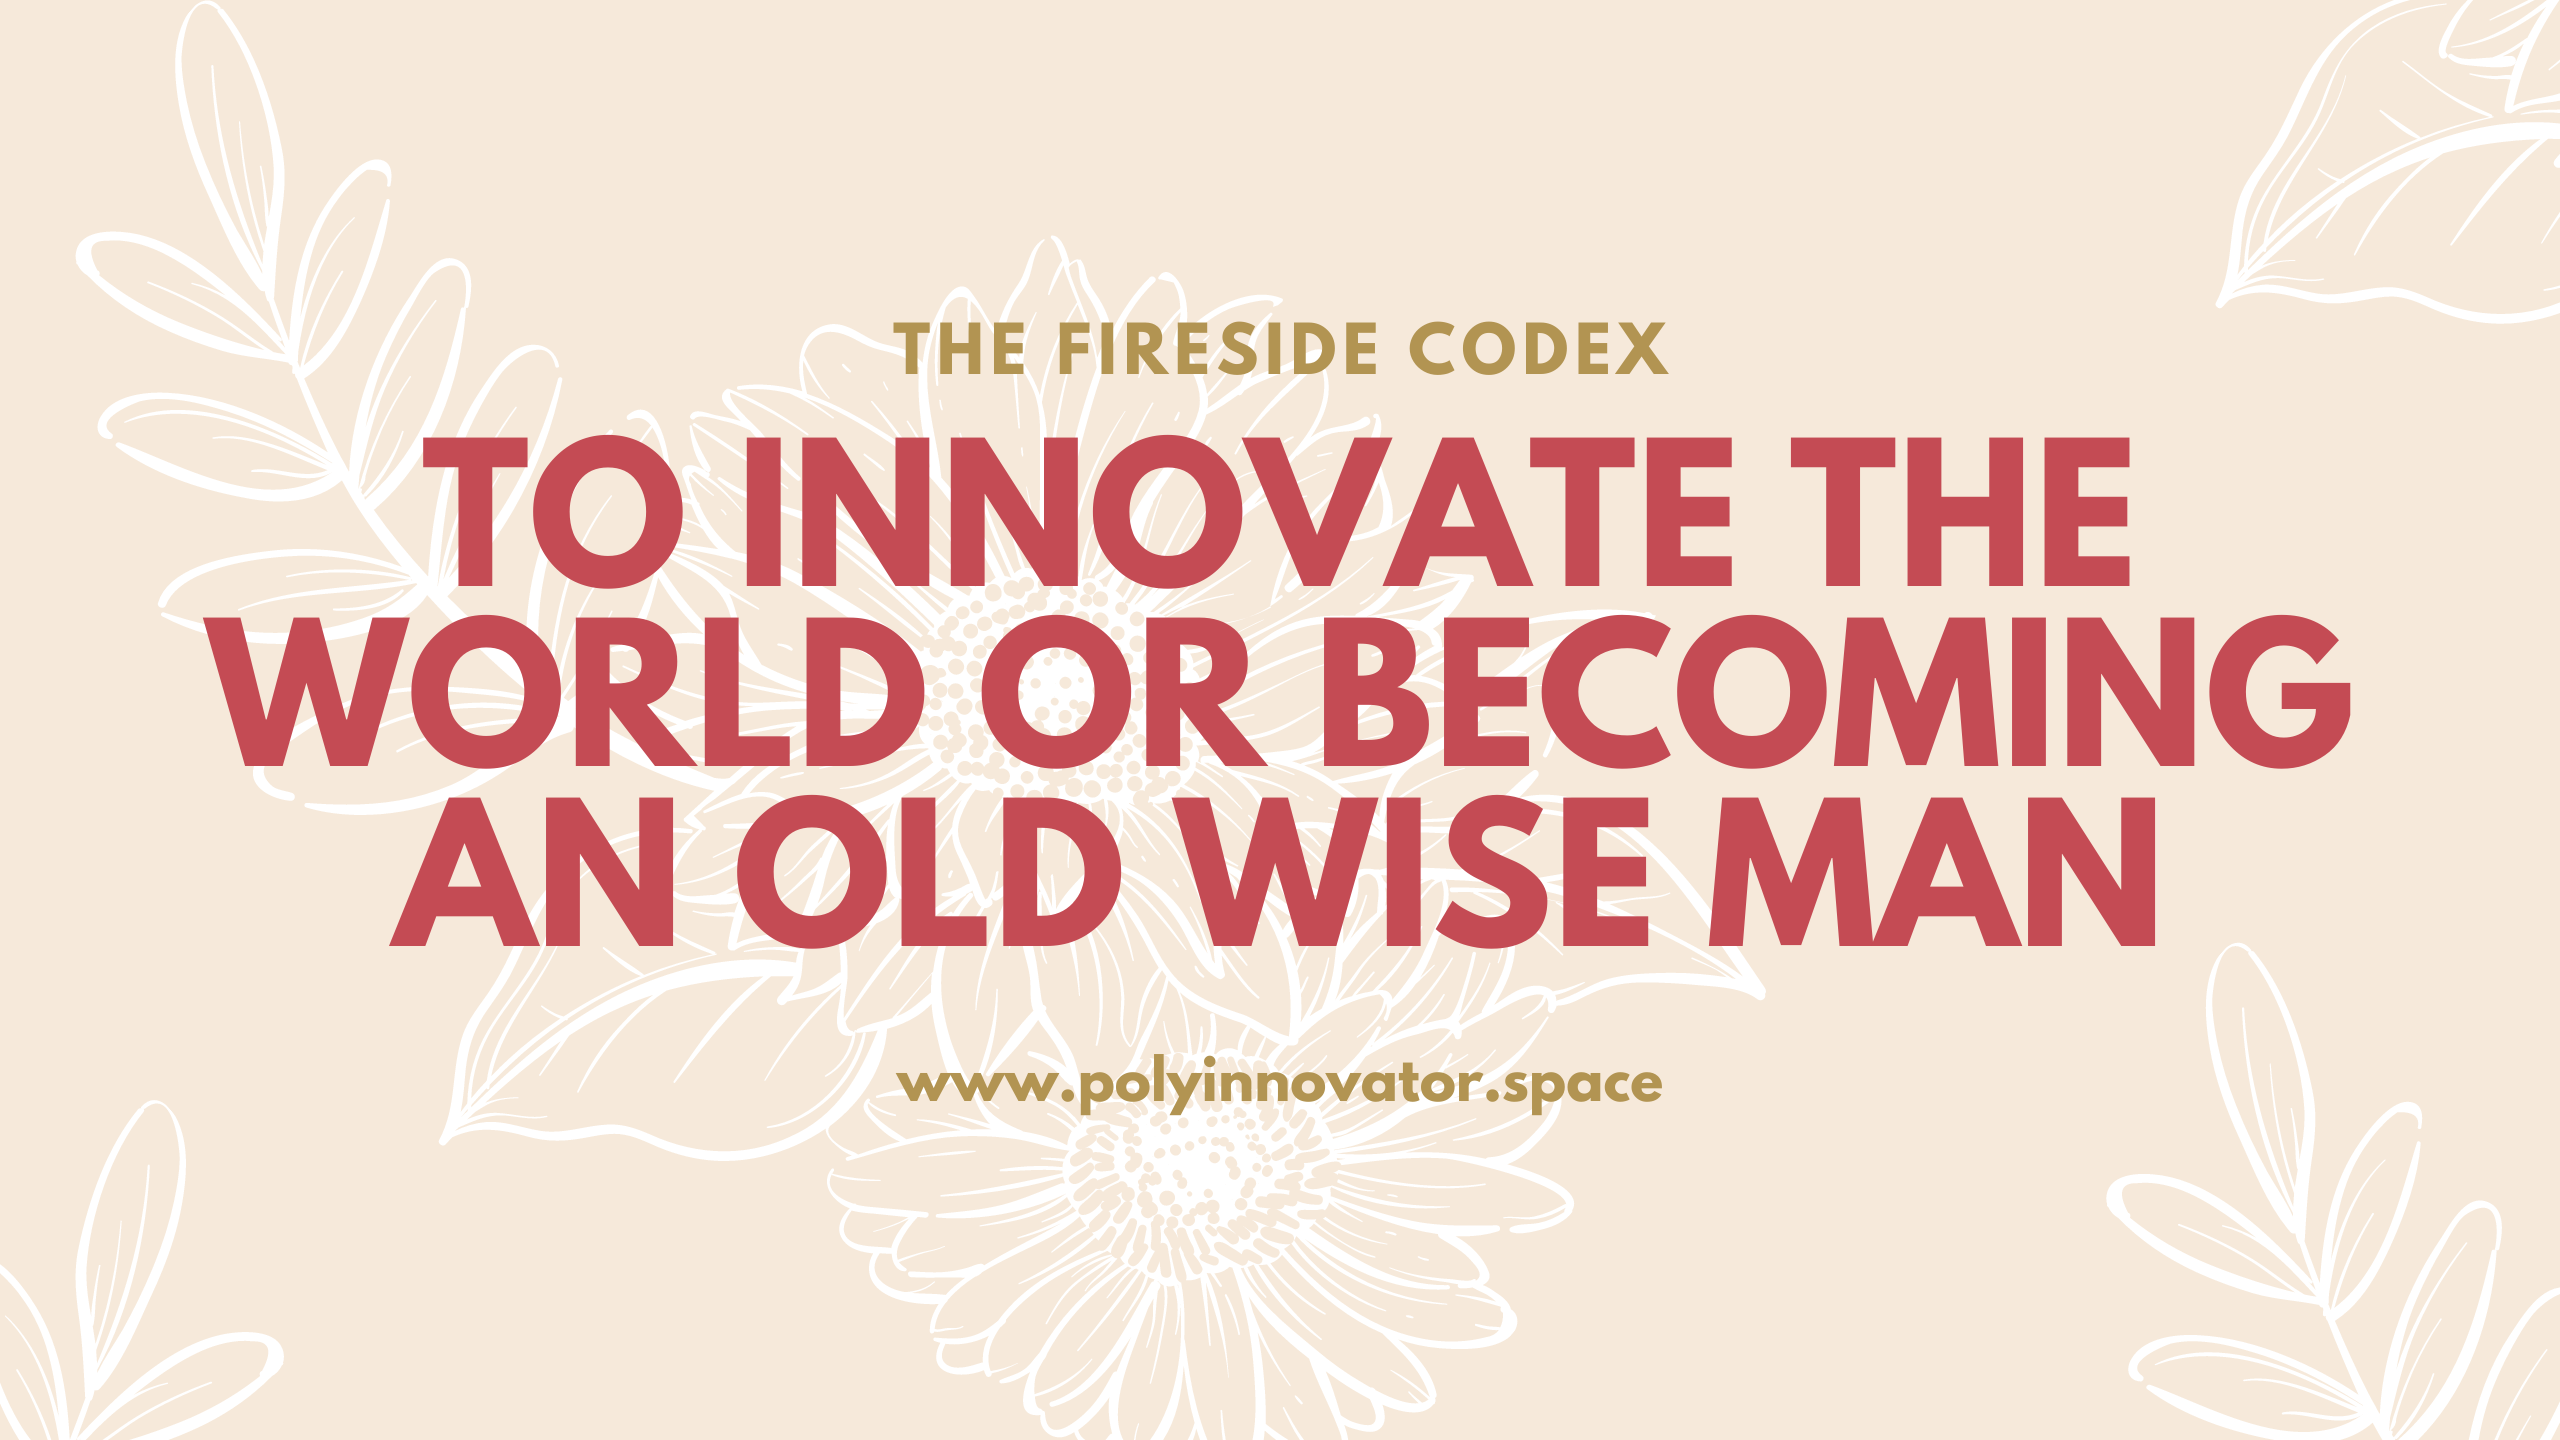 To Innovate the World or Becoming an Old Wise Man